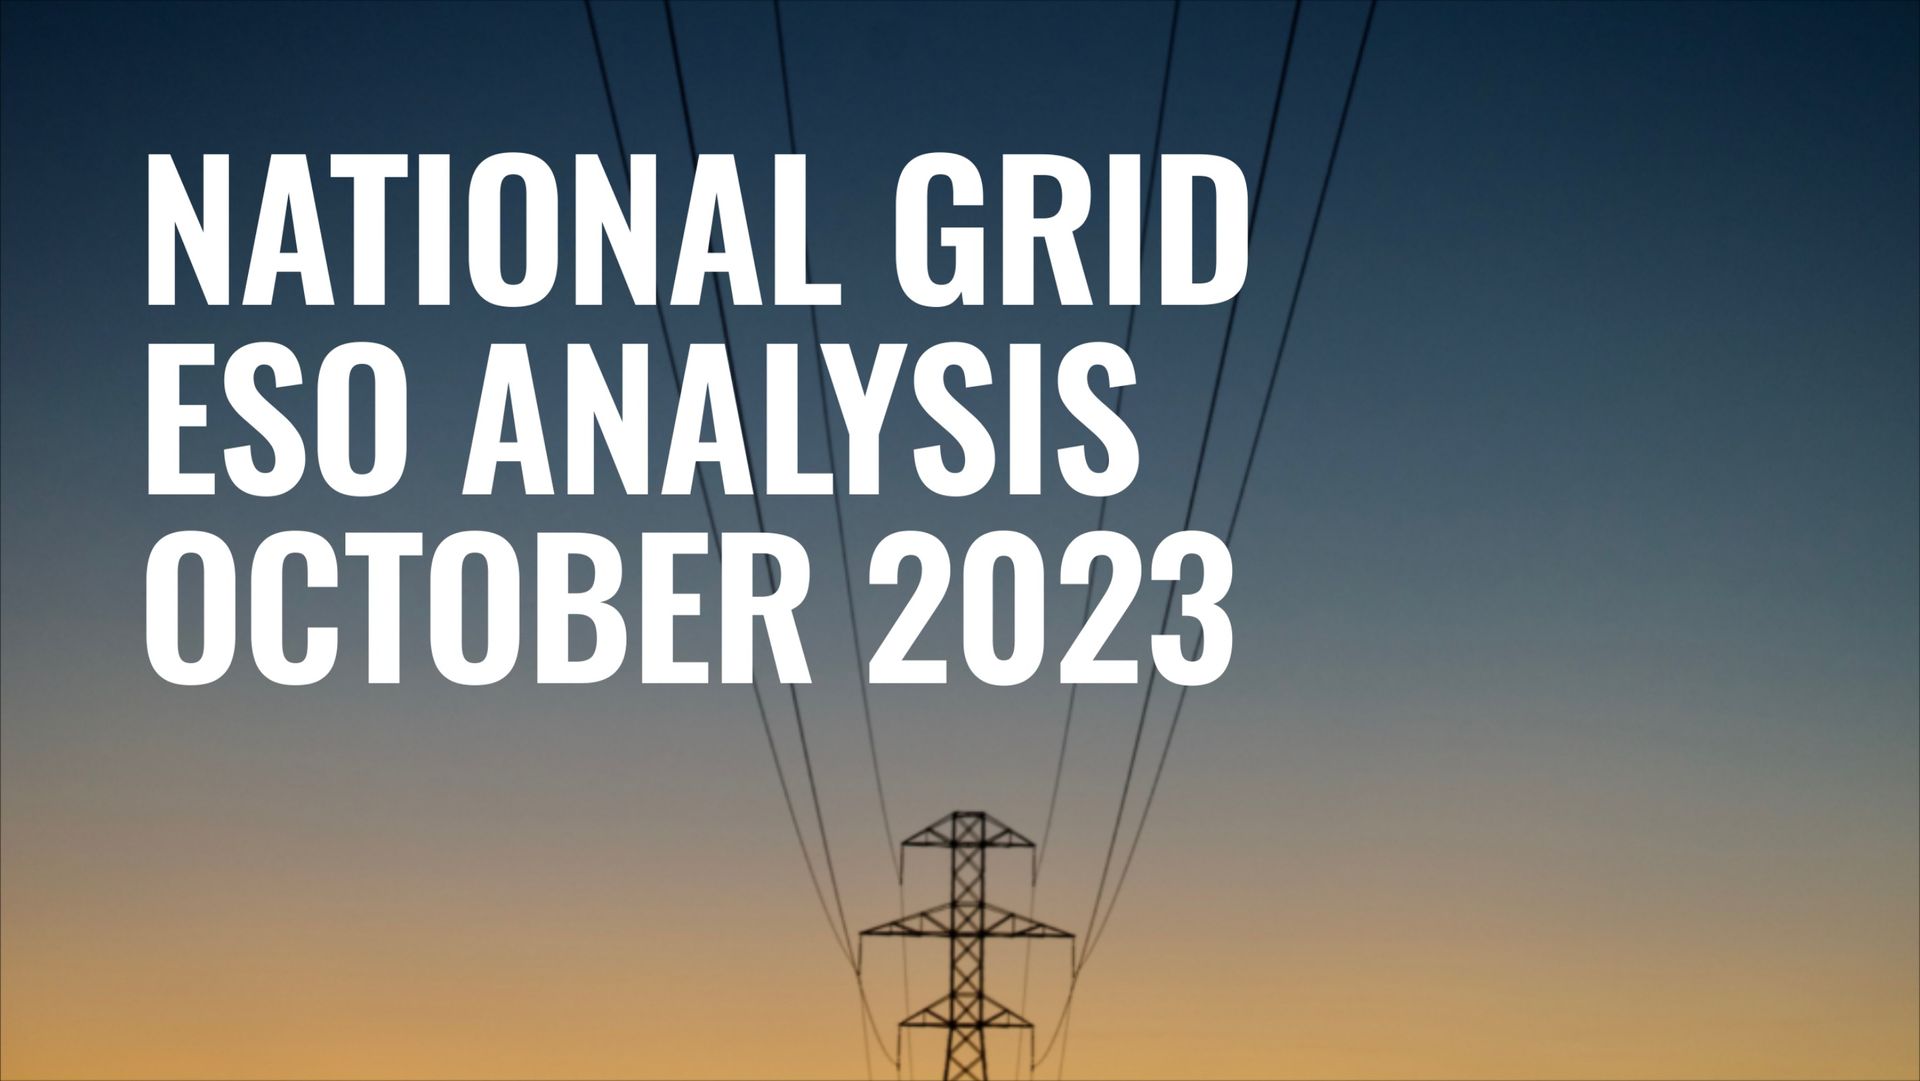 Pylons with text in white: National Grid ESO Analysis October 2023